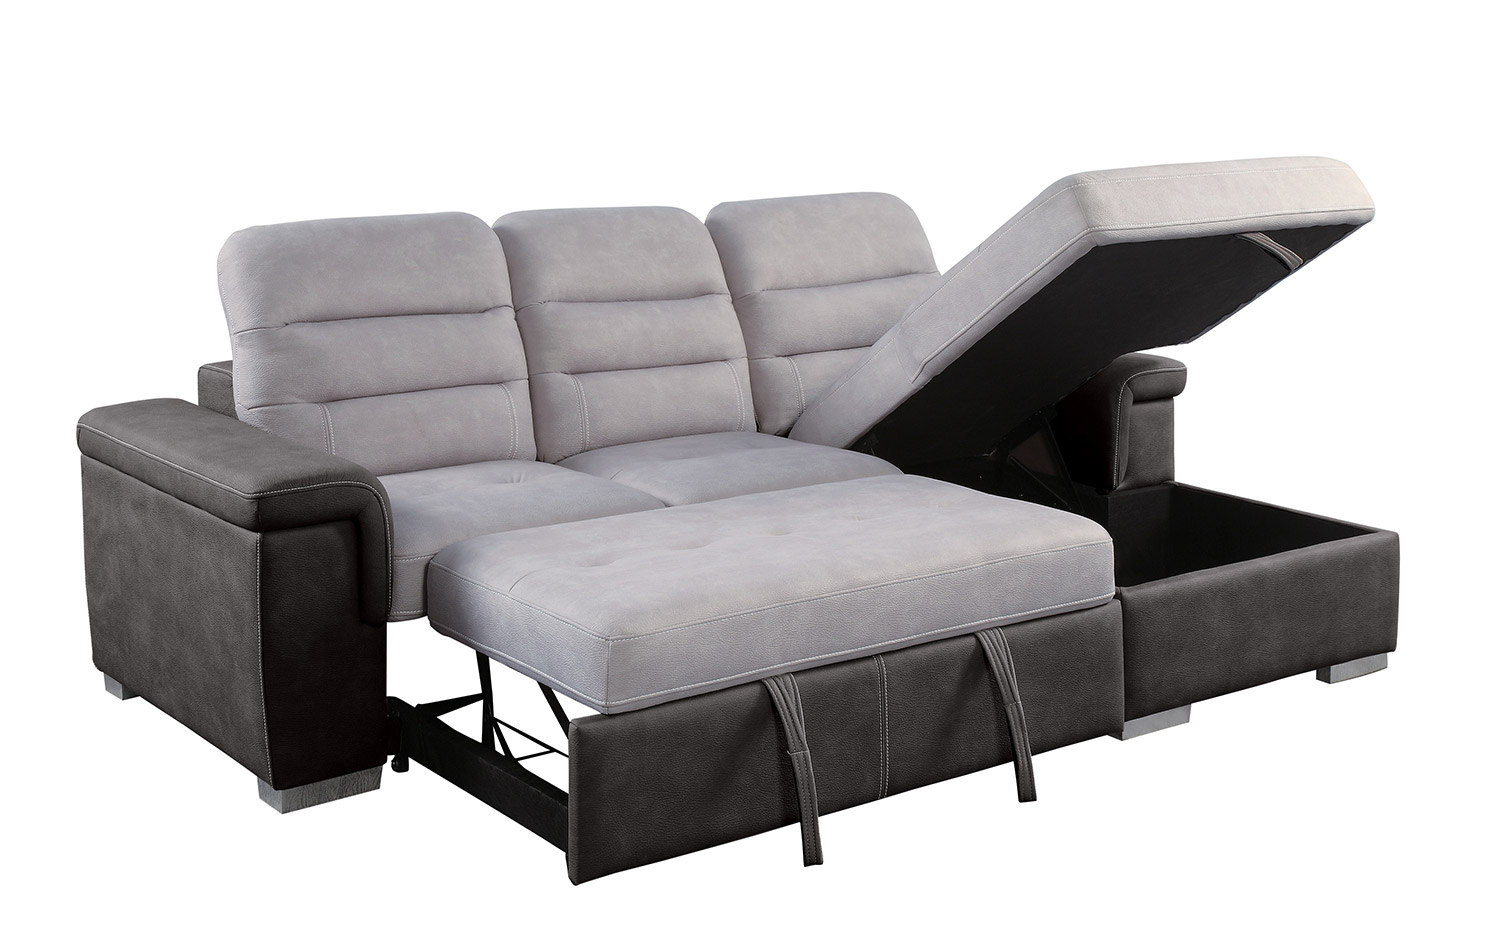 Homelegance Alfio Sectional with Pull-out Bed and Hidden Storage - Silver/Chocolate